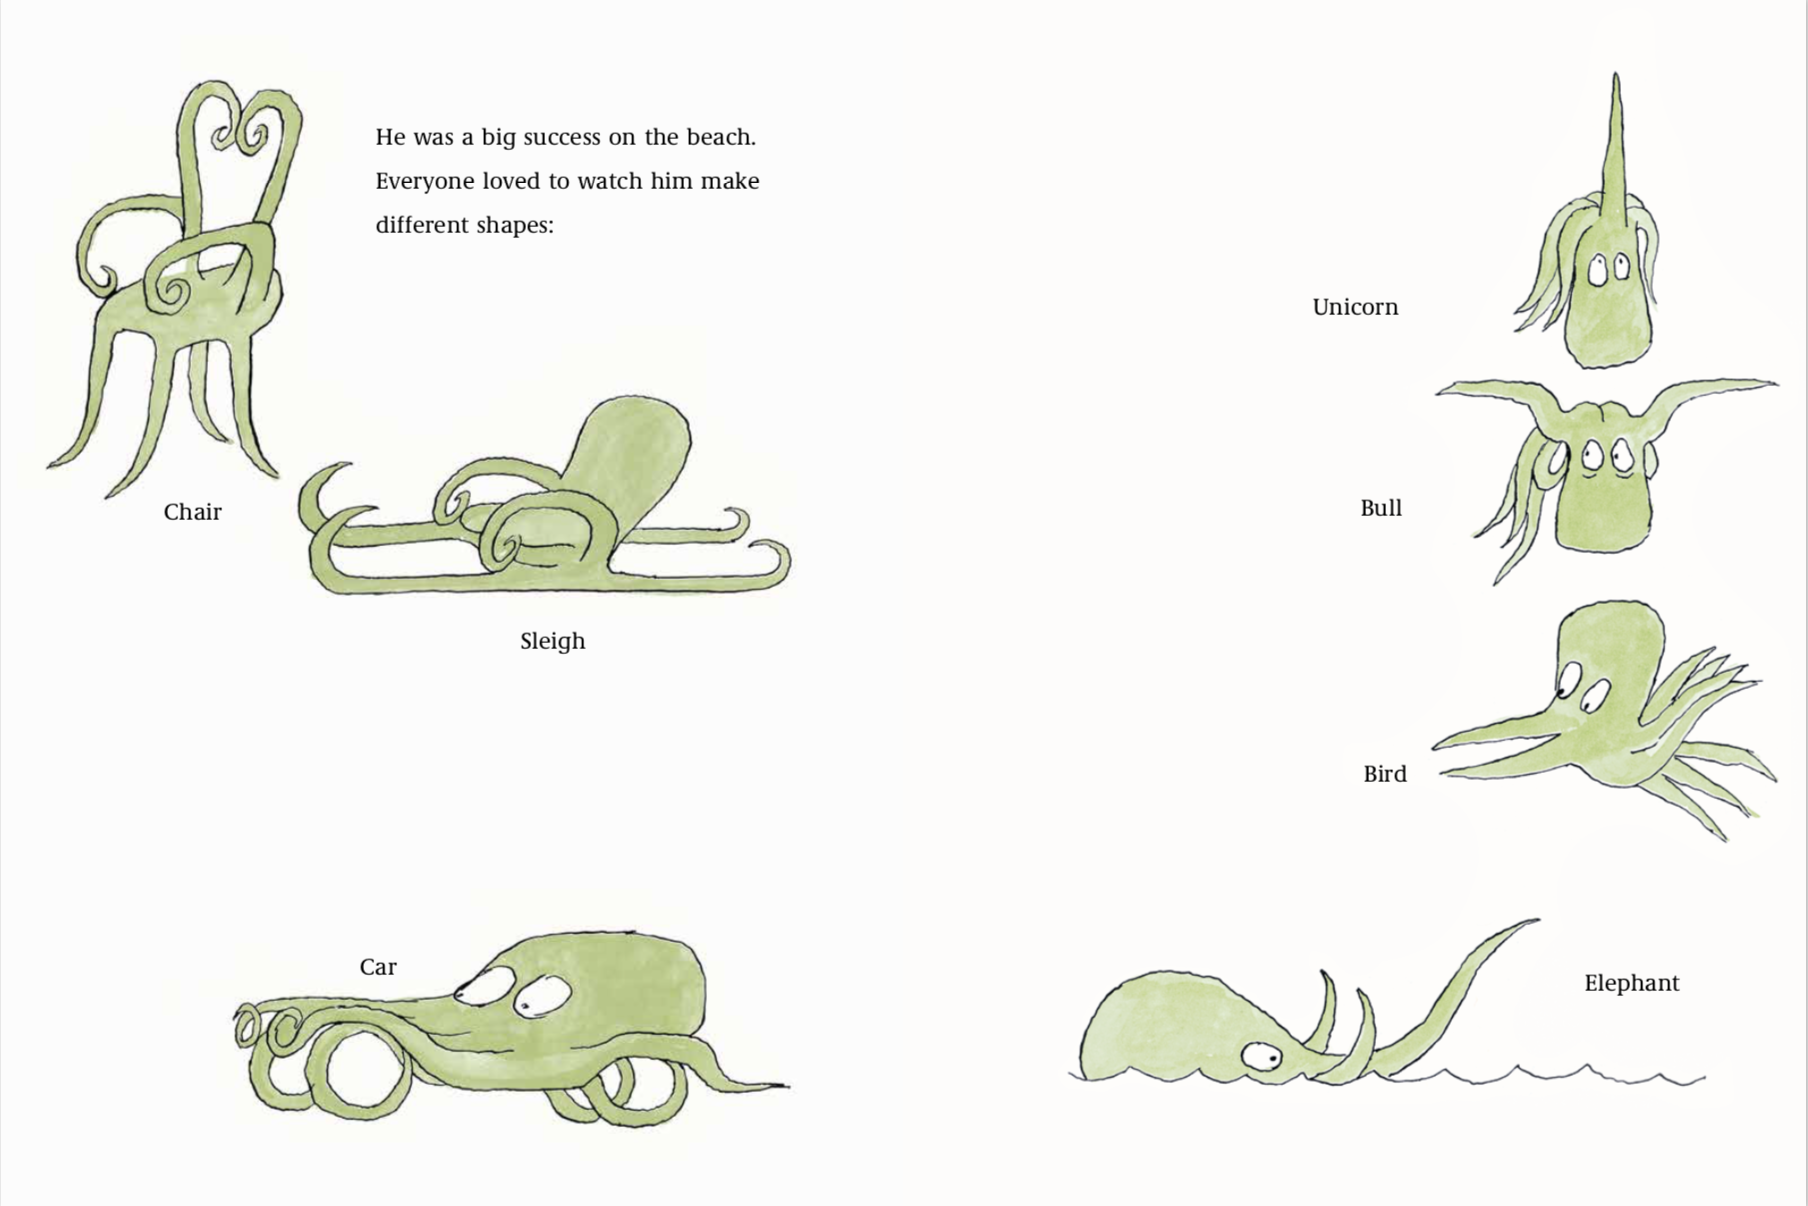 By Tomi Ungerer from Emile: The Helpful Octopus copyright Phaidon 2018